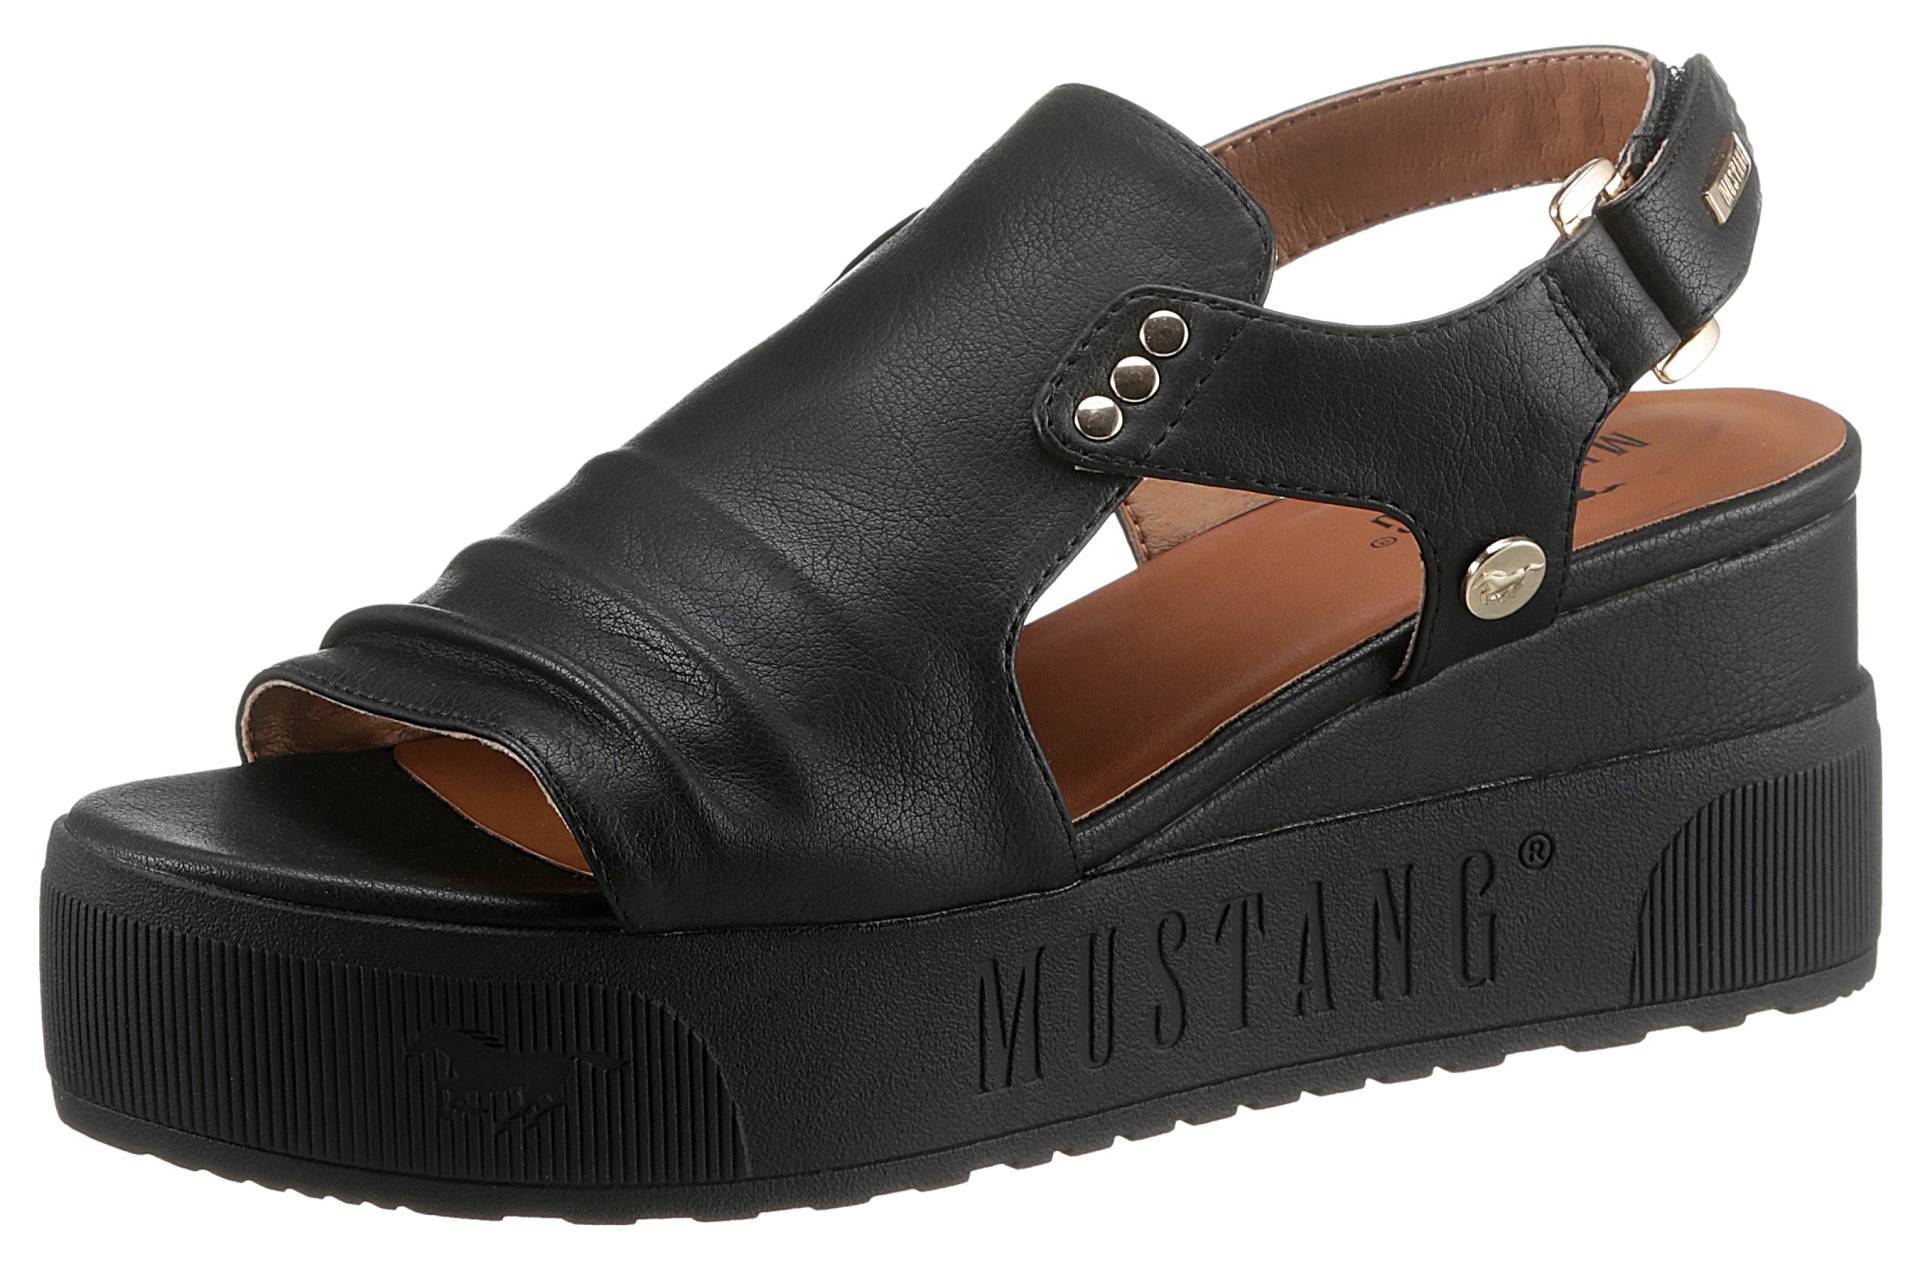 Mustang Shoes Keilsandalette von Mustang Shoes